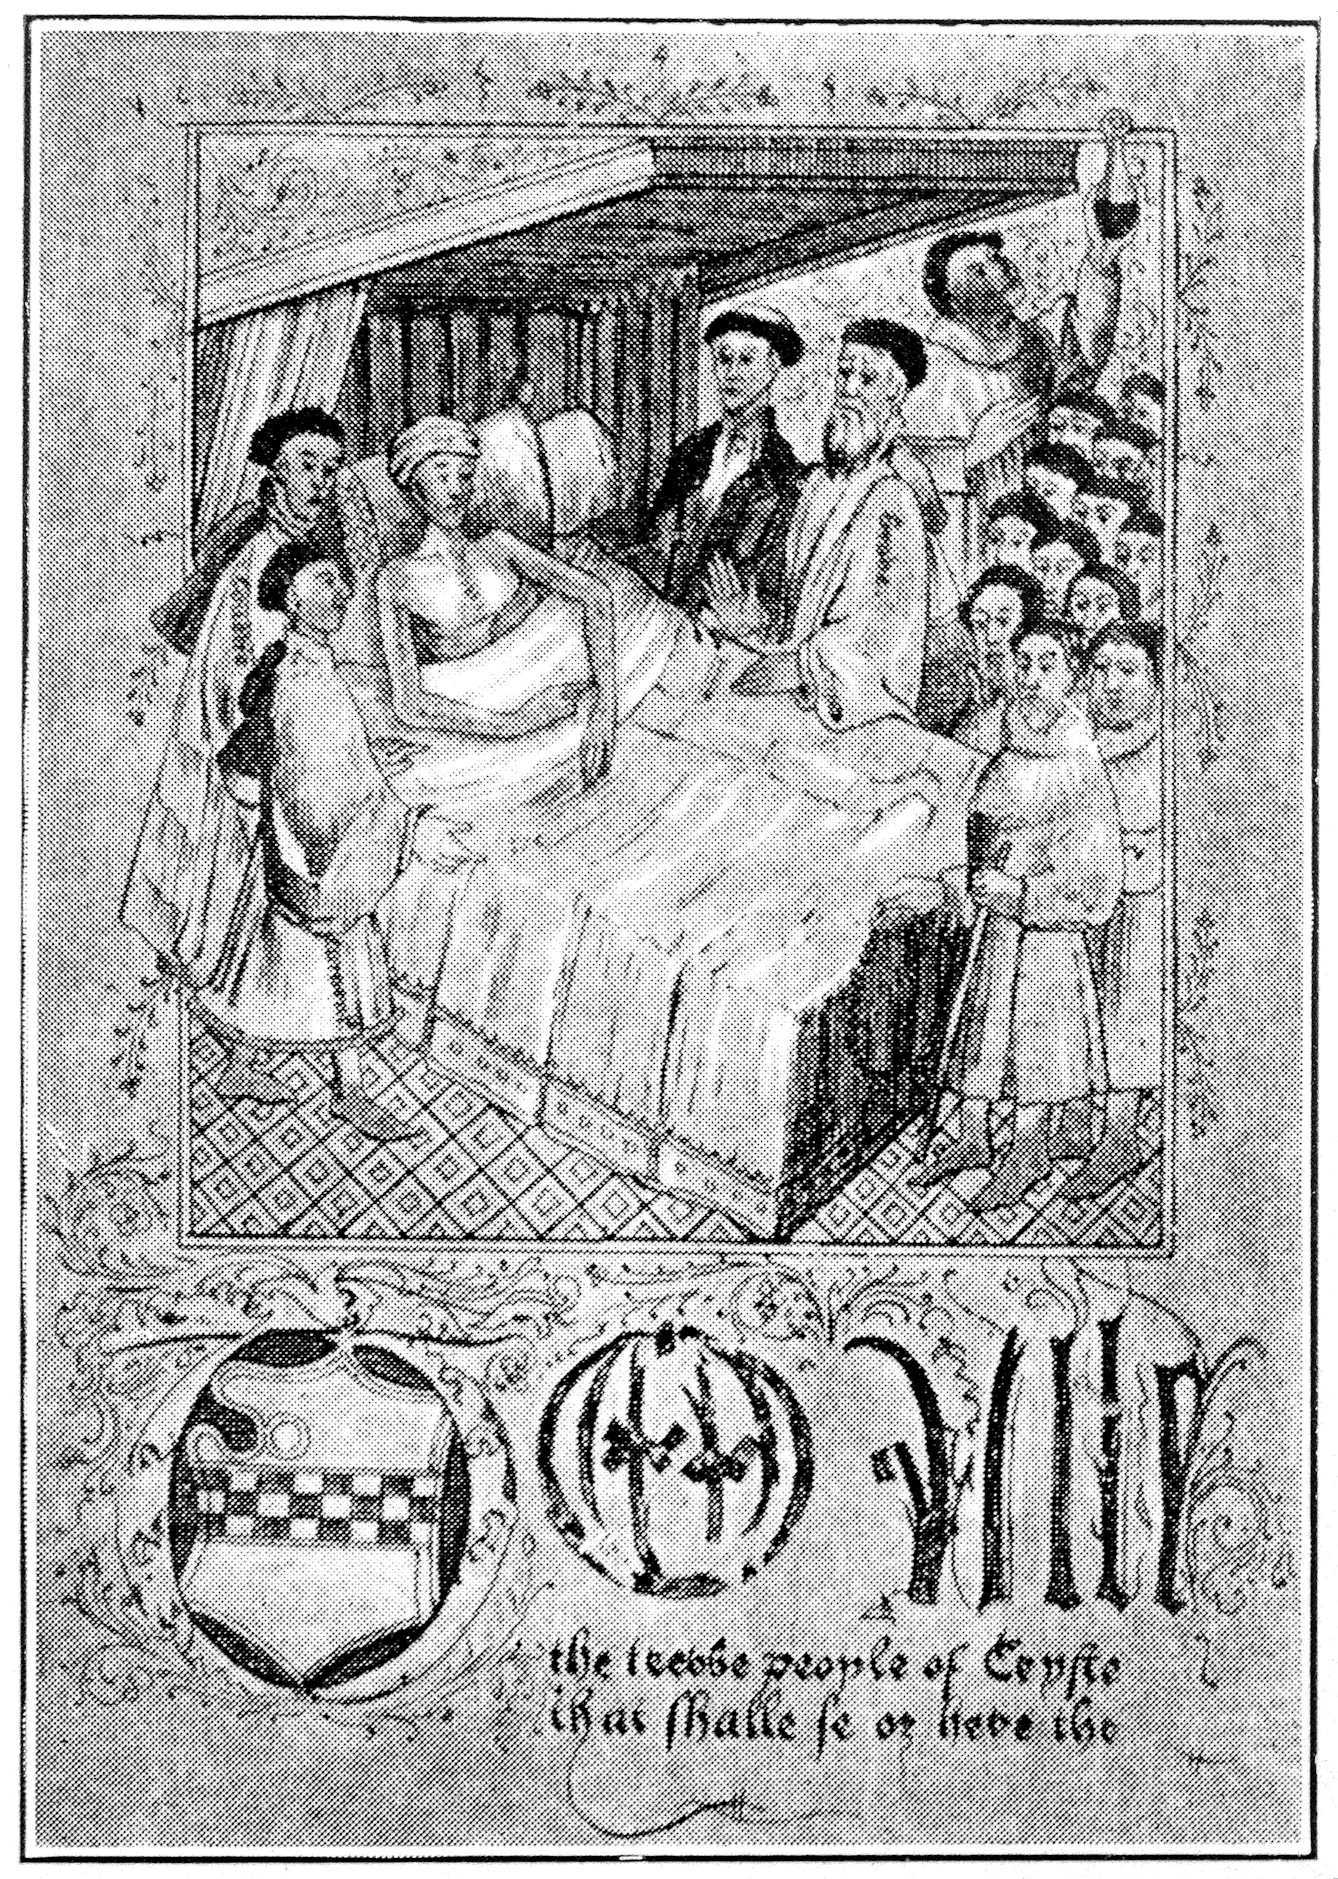 Black and white illustration of a man lying in bed surrounded by a group of men in clerical dress